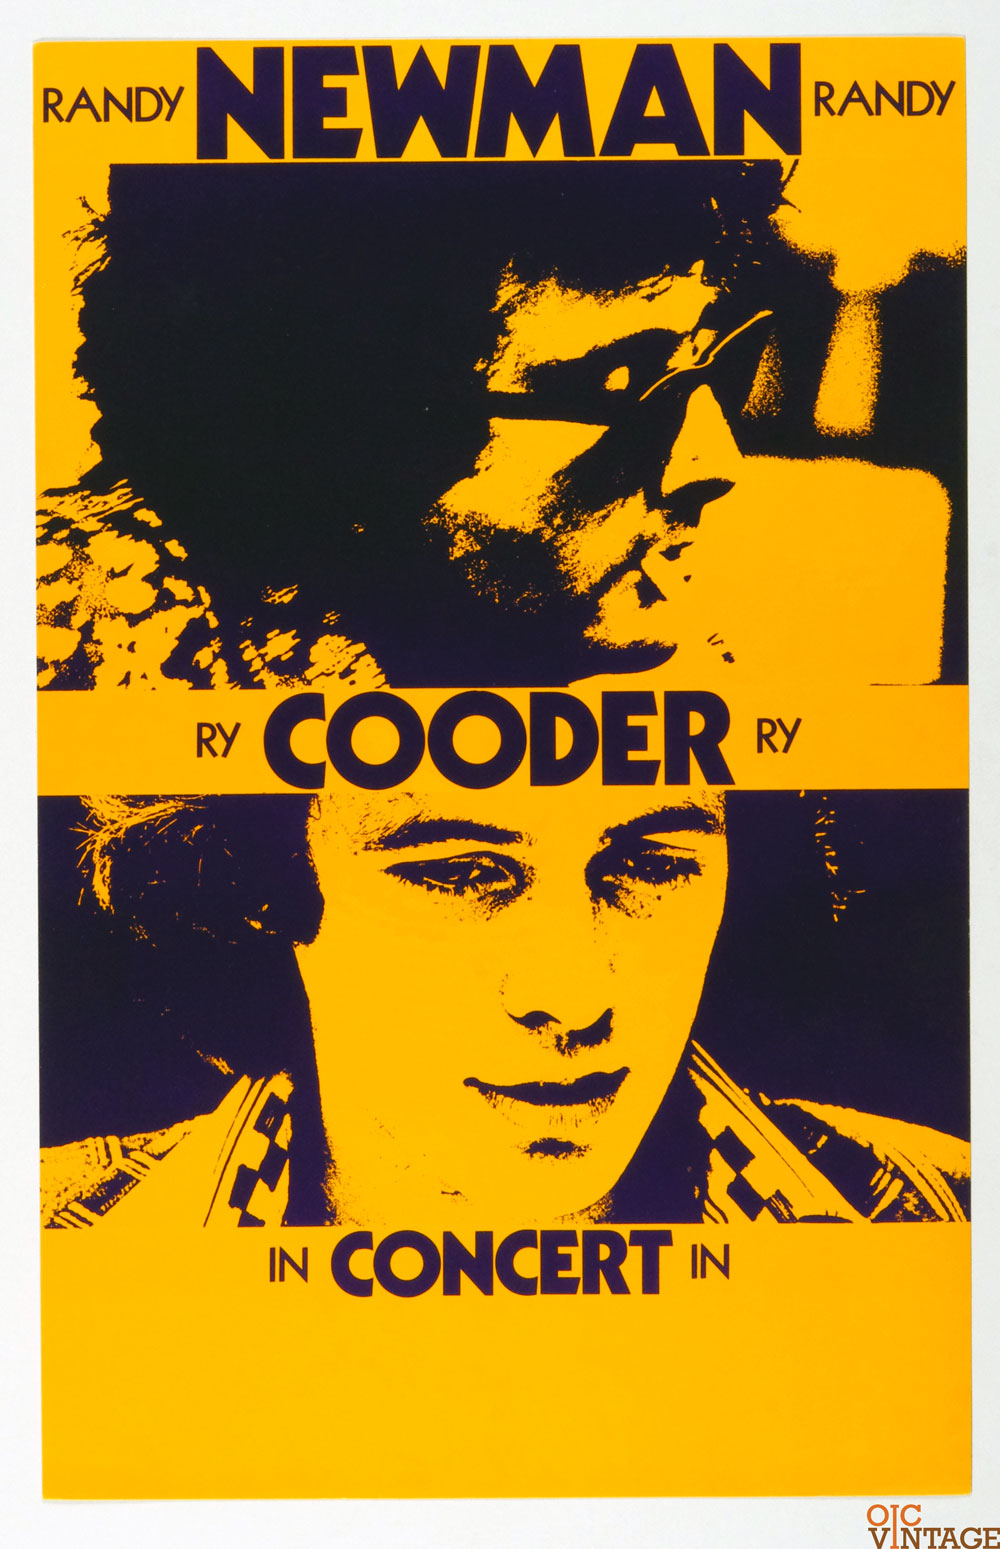 Randy Newman Poster w/ Ry Cooper 1974 Good Old Boys Album Release Concert